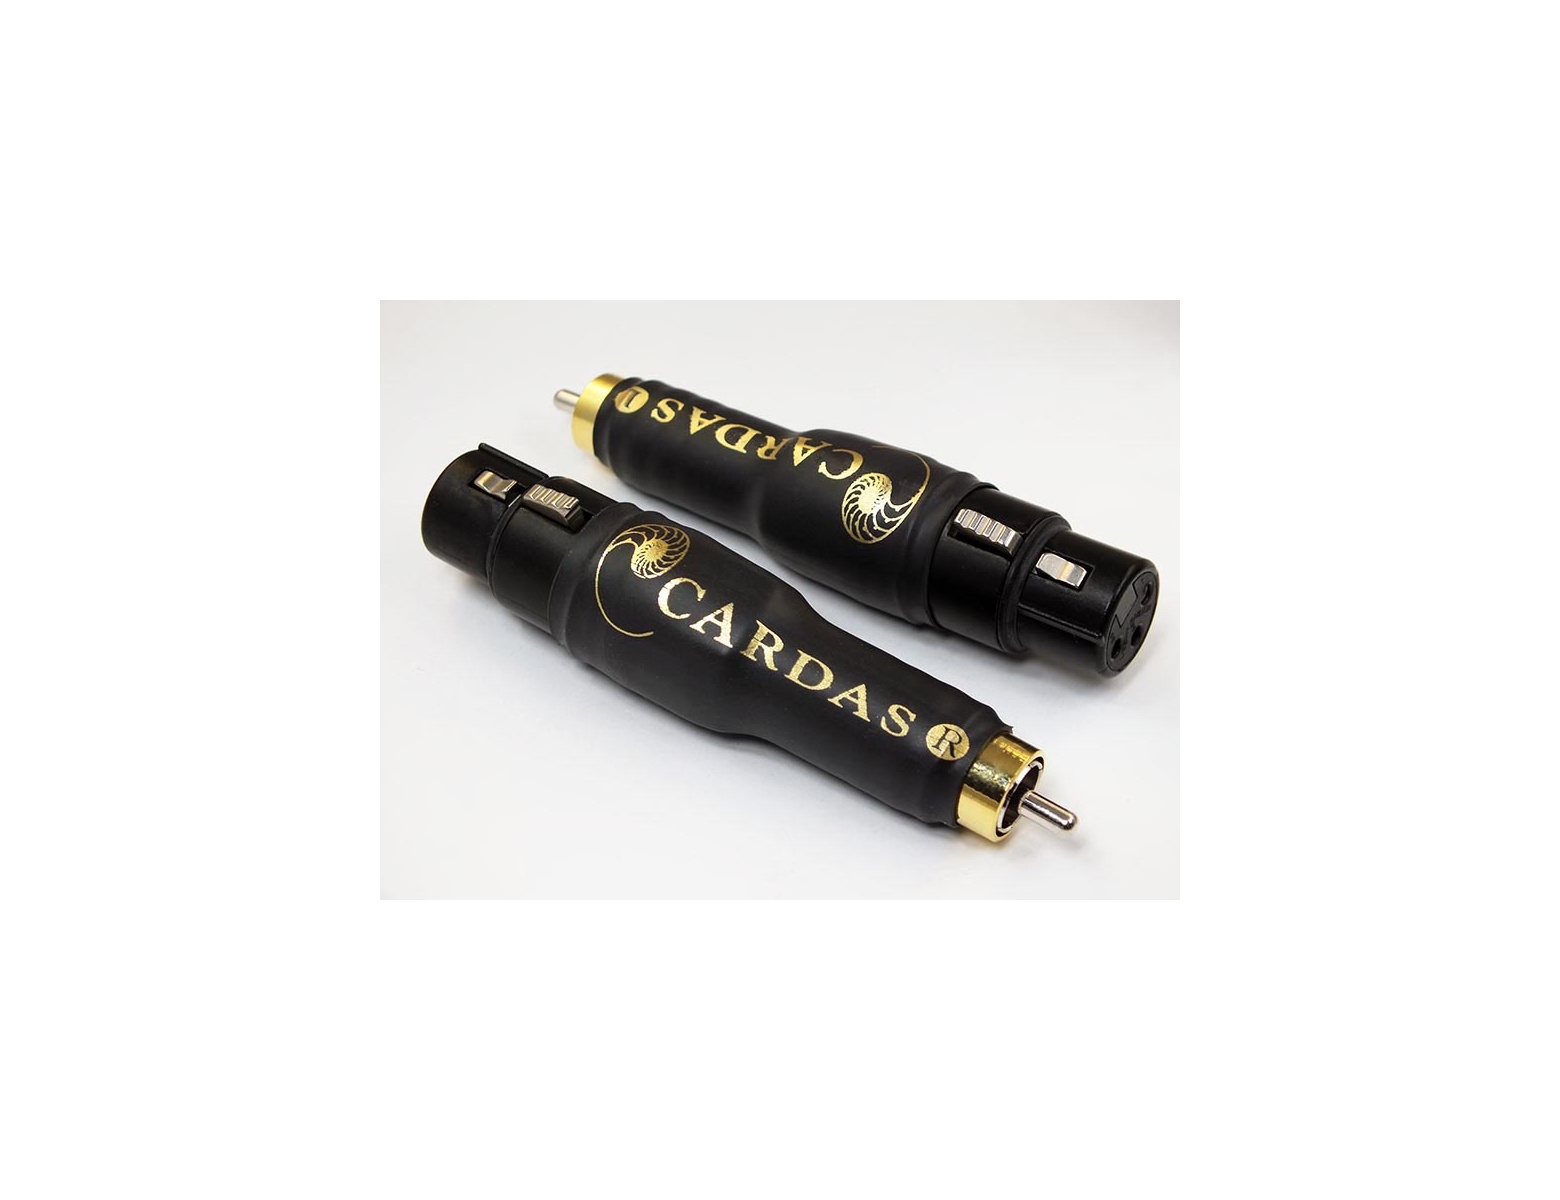 Cardas Audio MRCA/FXLR Male RCA to Female XLR Adapter black series (Set  of 2) PlayStereo